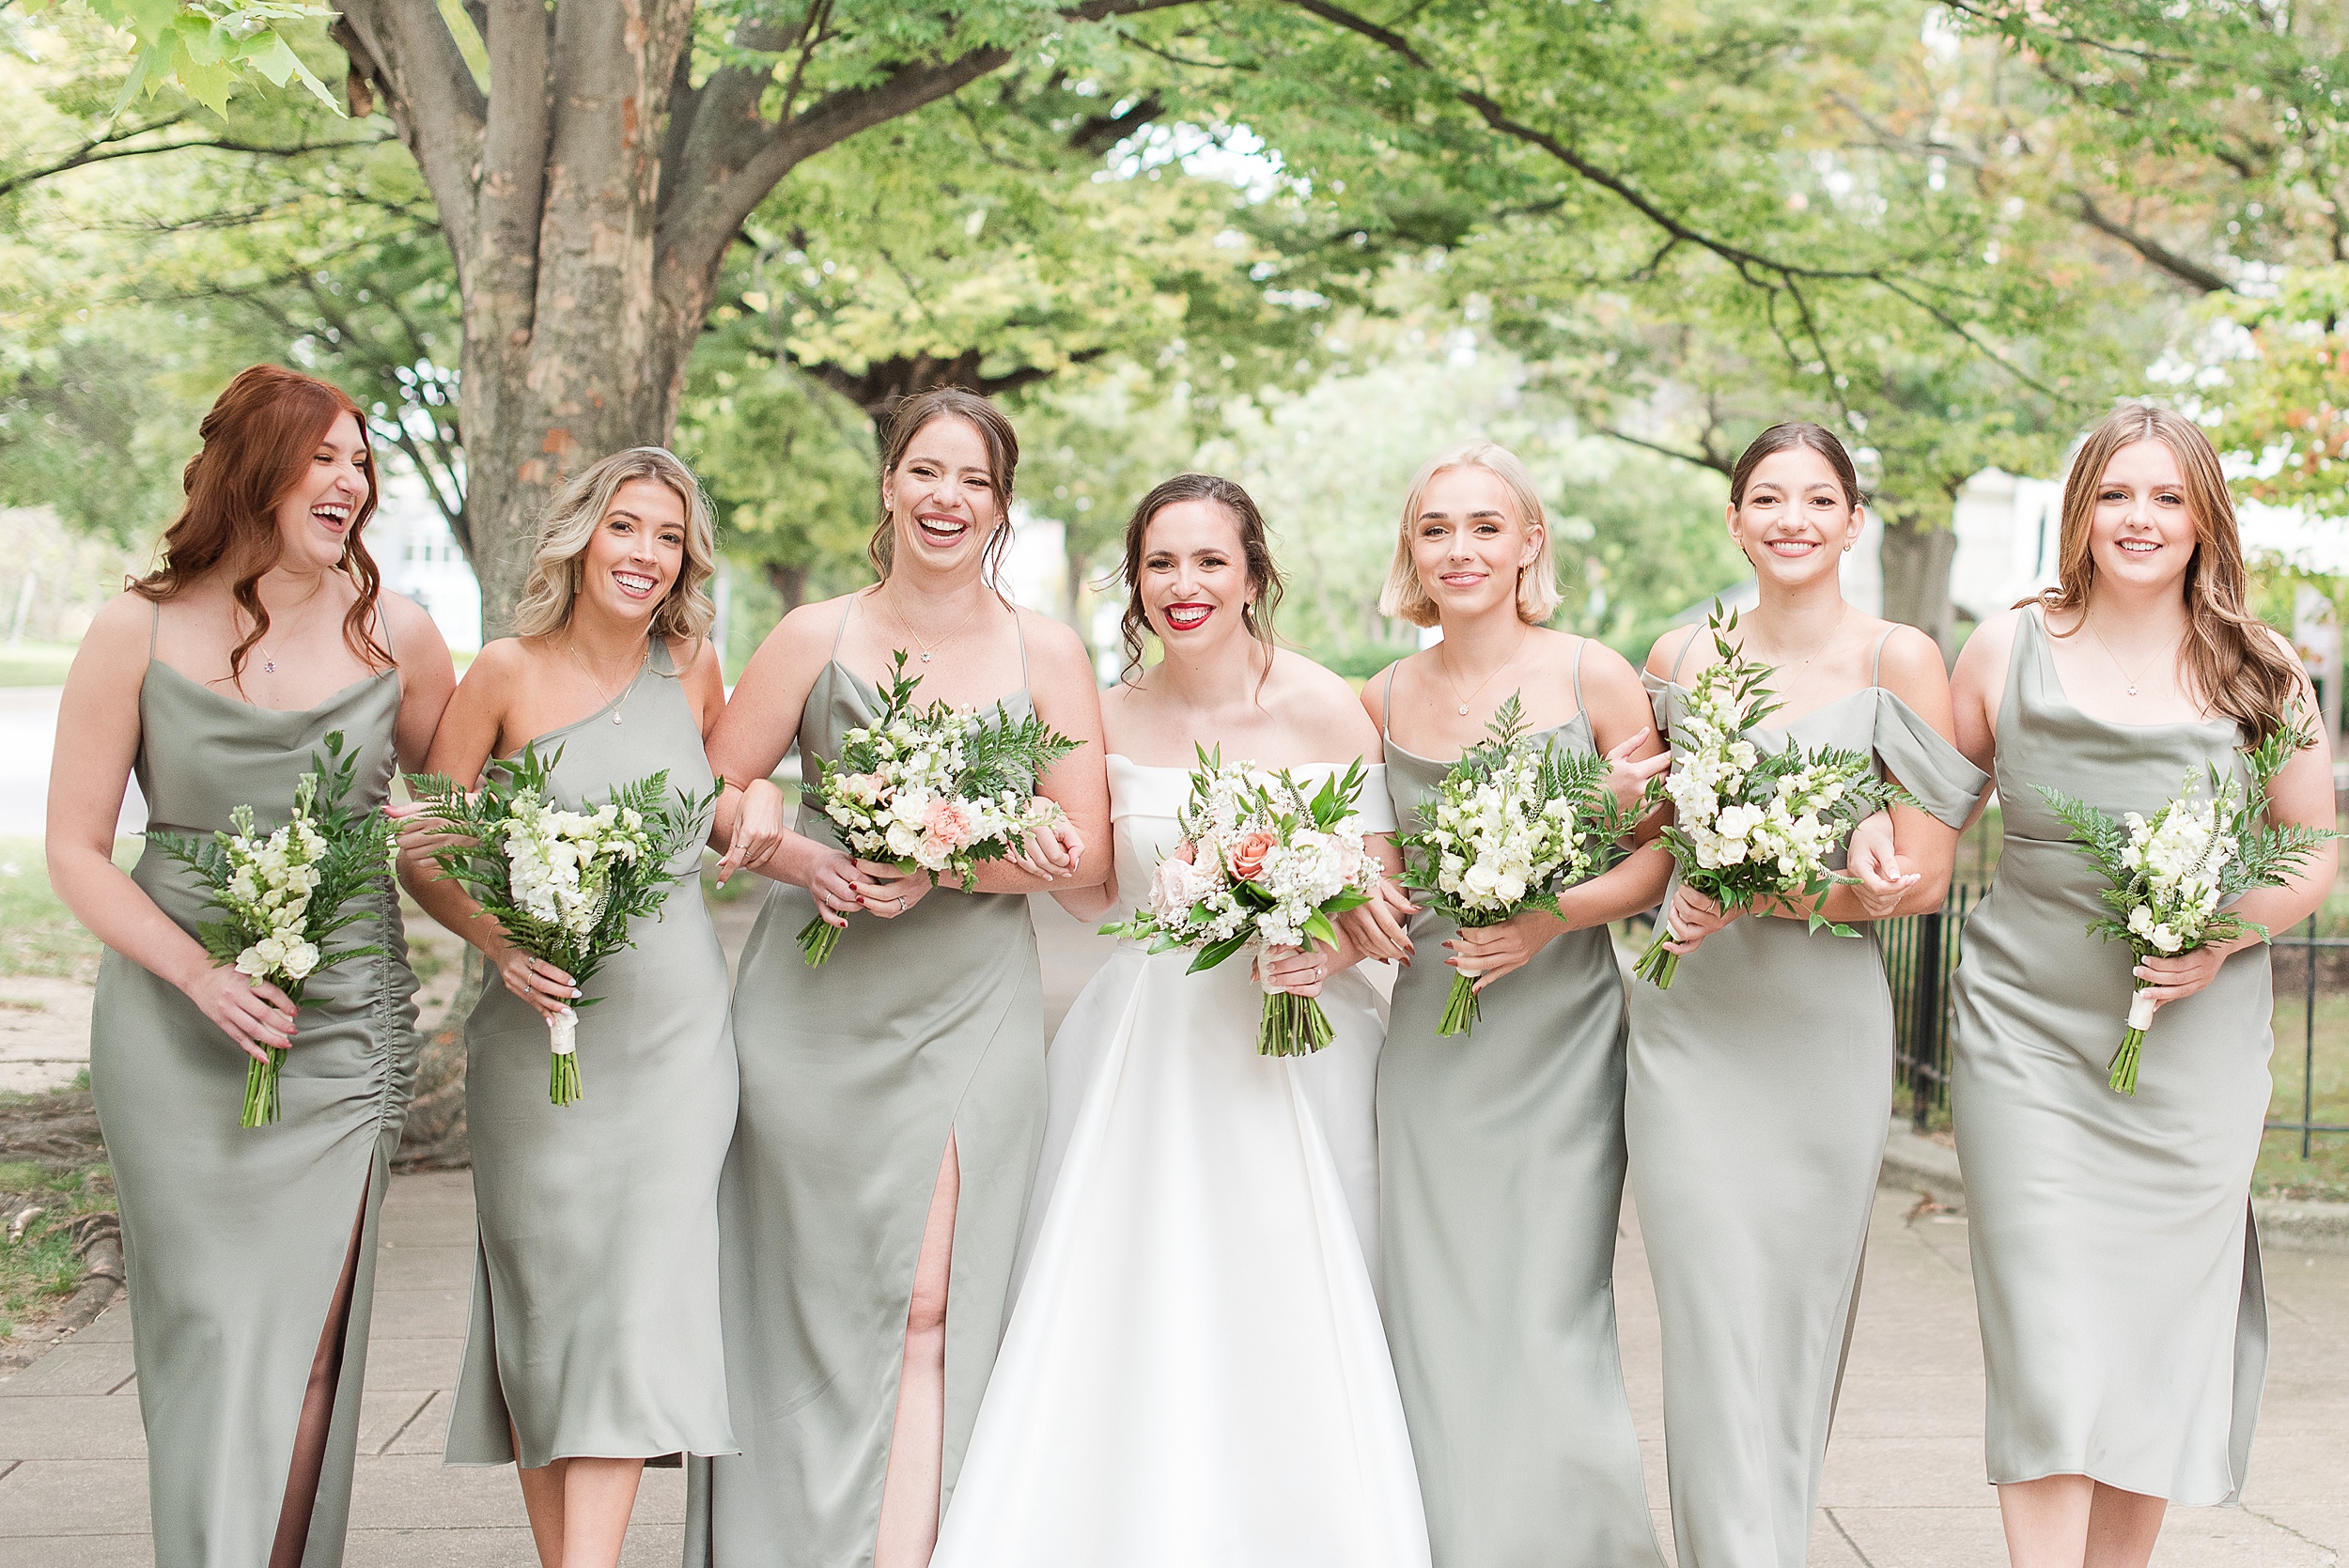 A bride laughs with her bridesmaids in green dresses while walking up a sidewalk